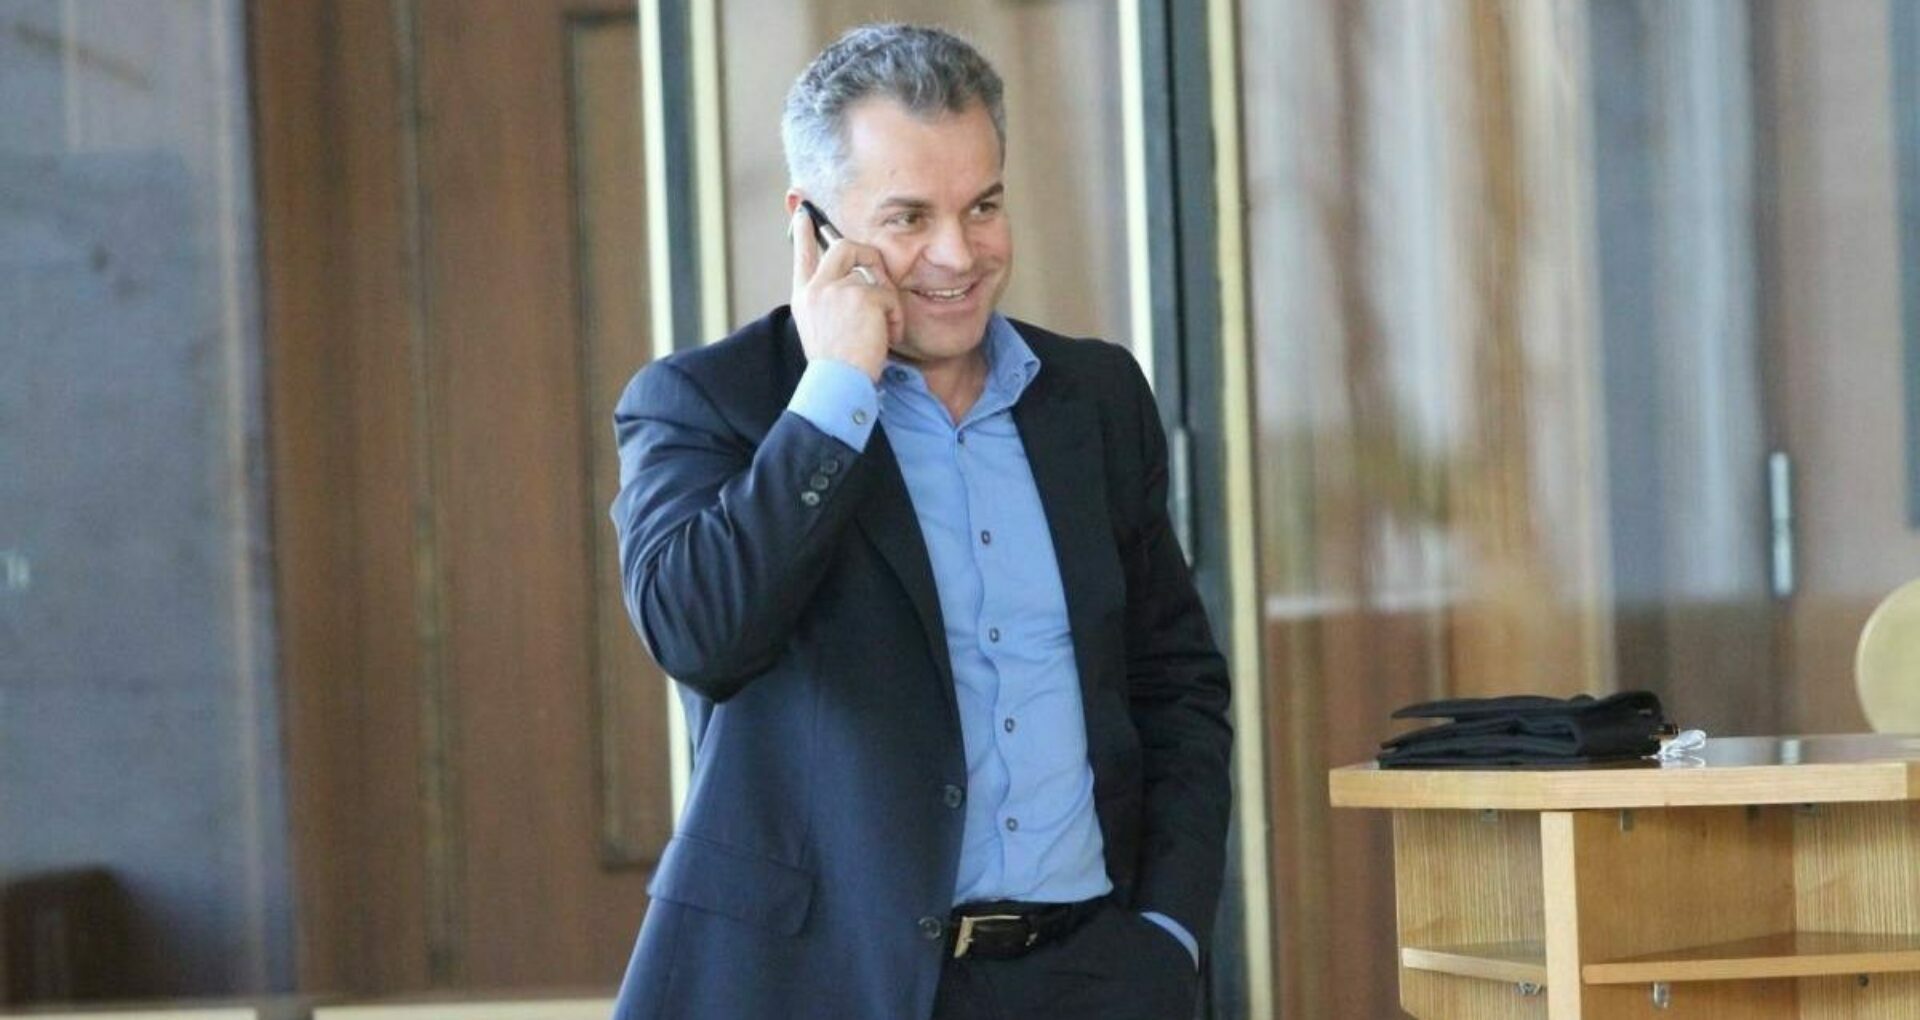 Several People from Plahotniuc’s Entourage Received an iPhone 6 or 7 and Used These Phones to Discuss with Plahotniuc